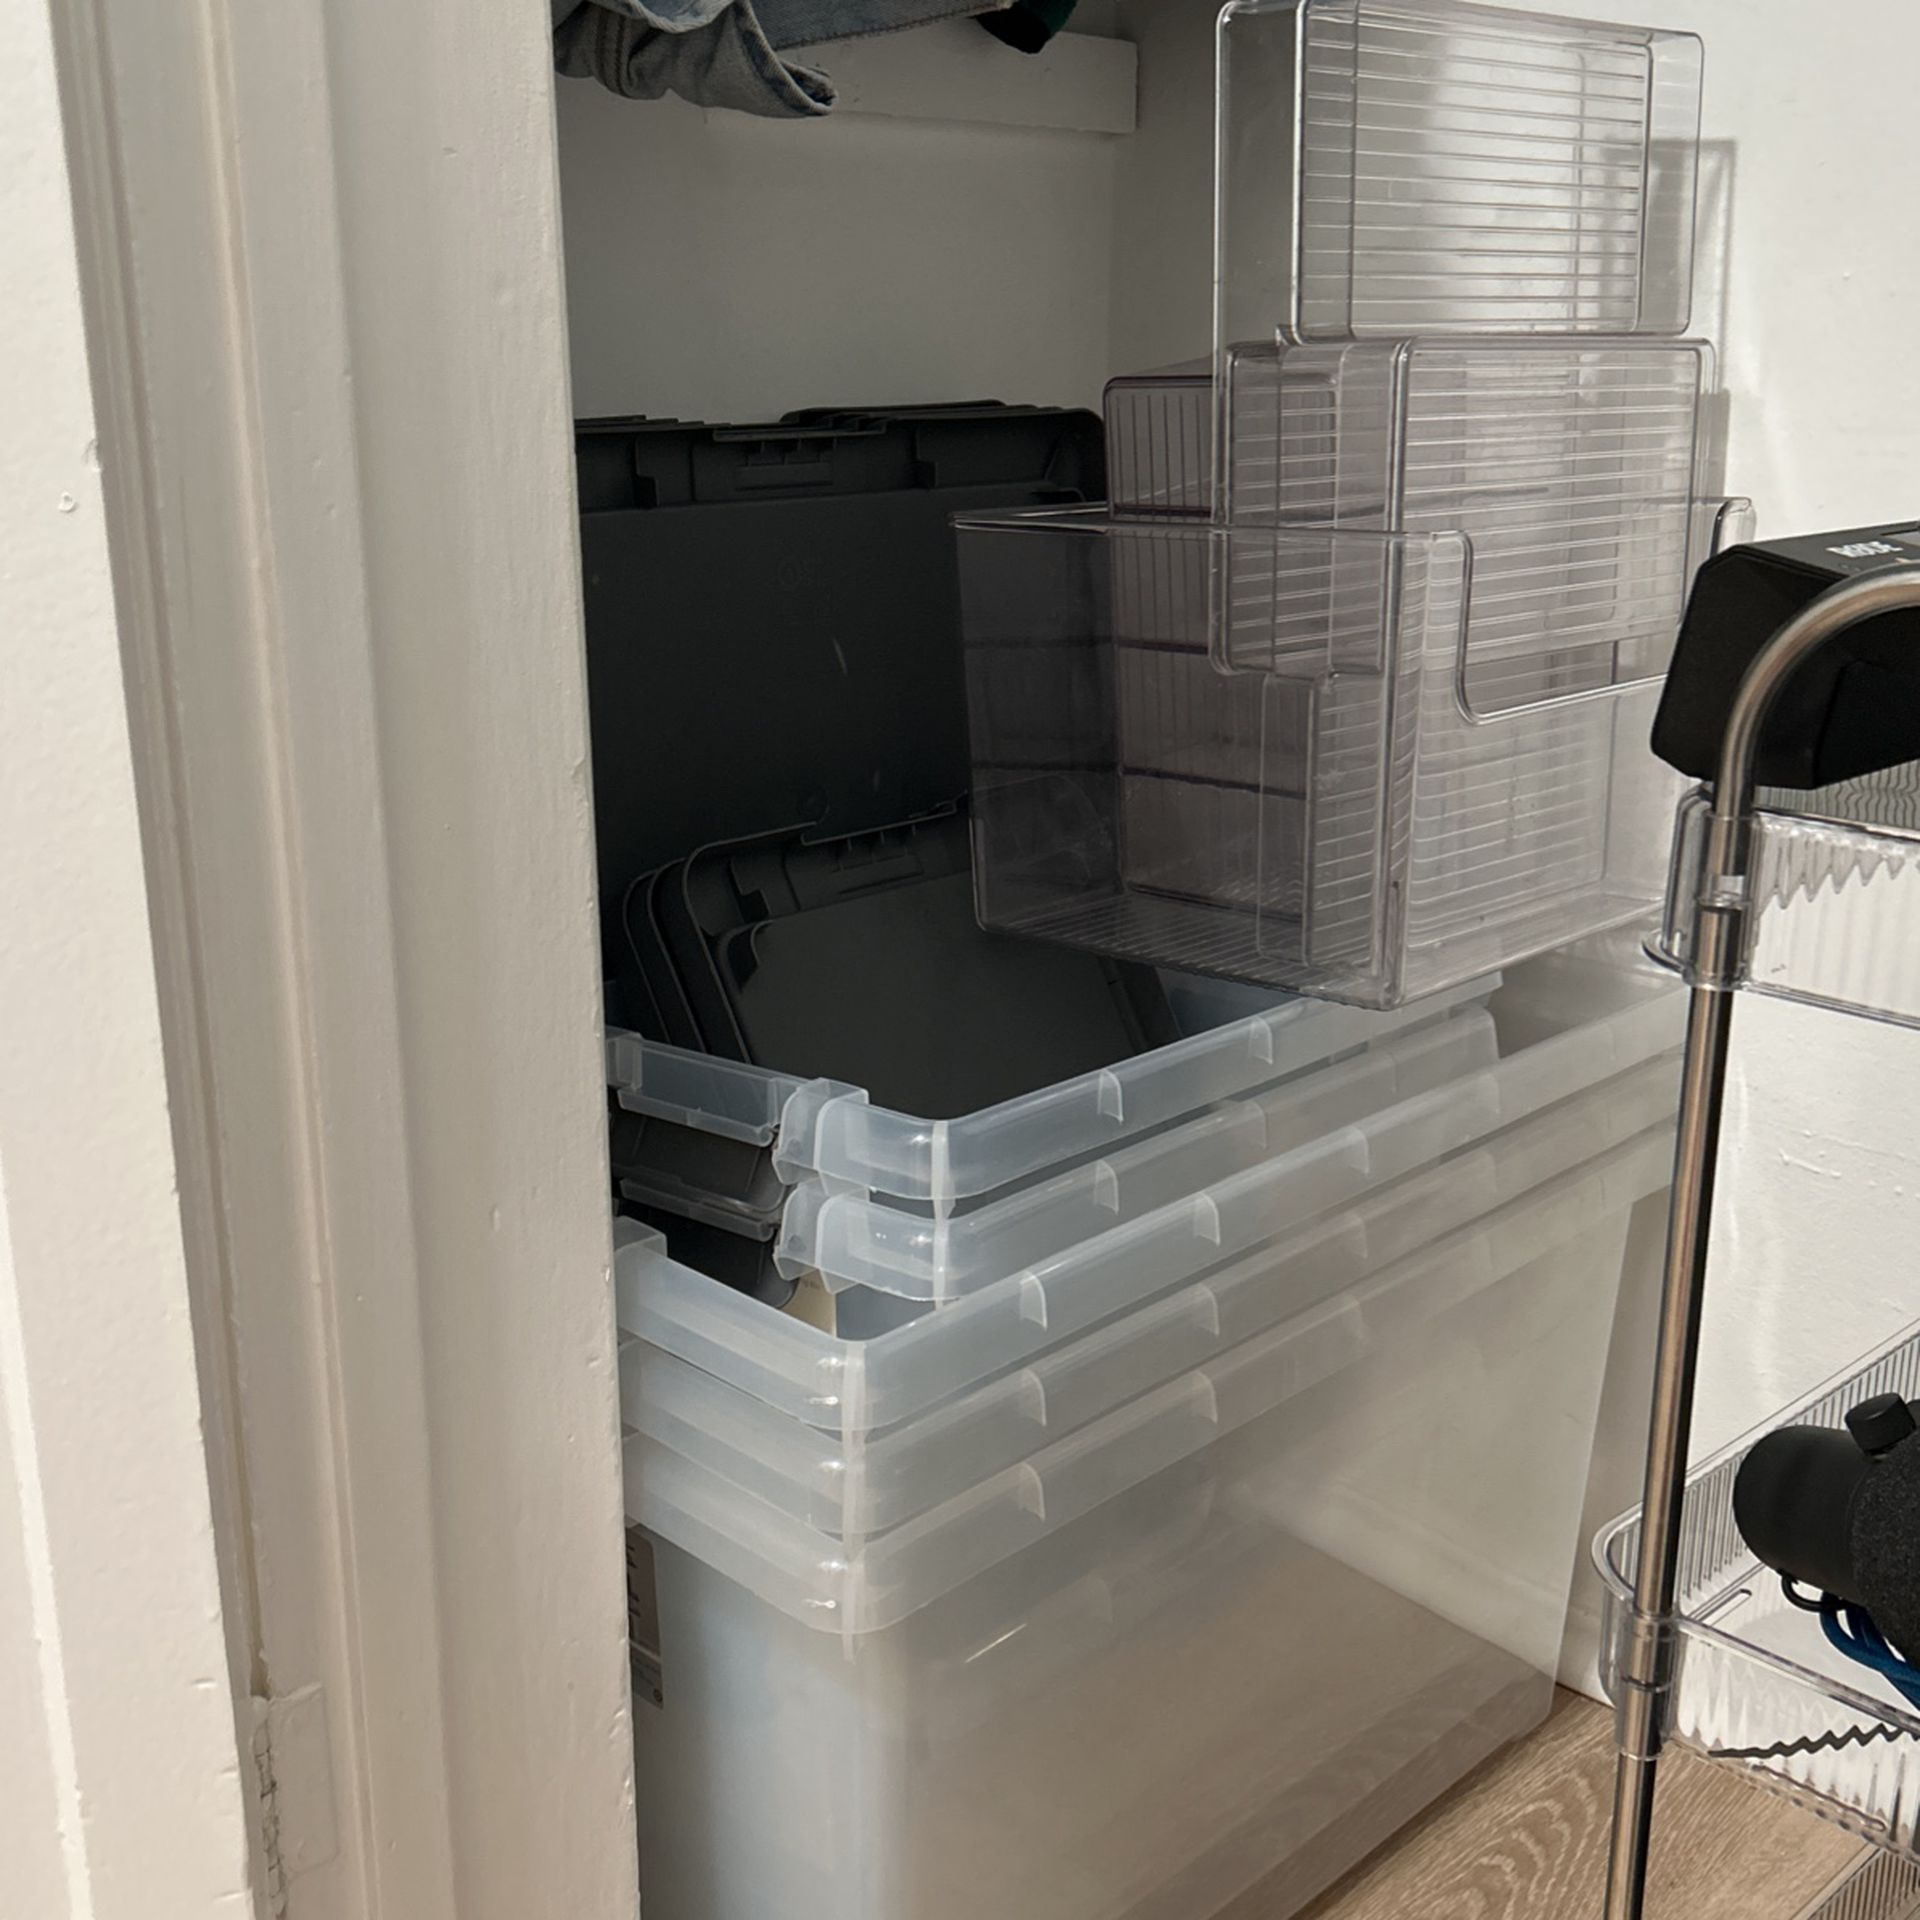 Various storage containers/organizers